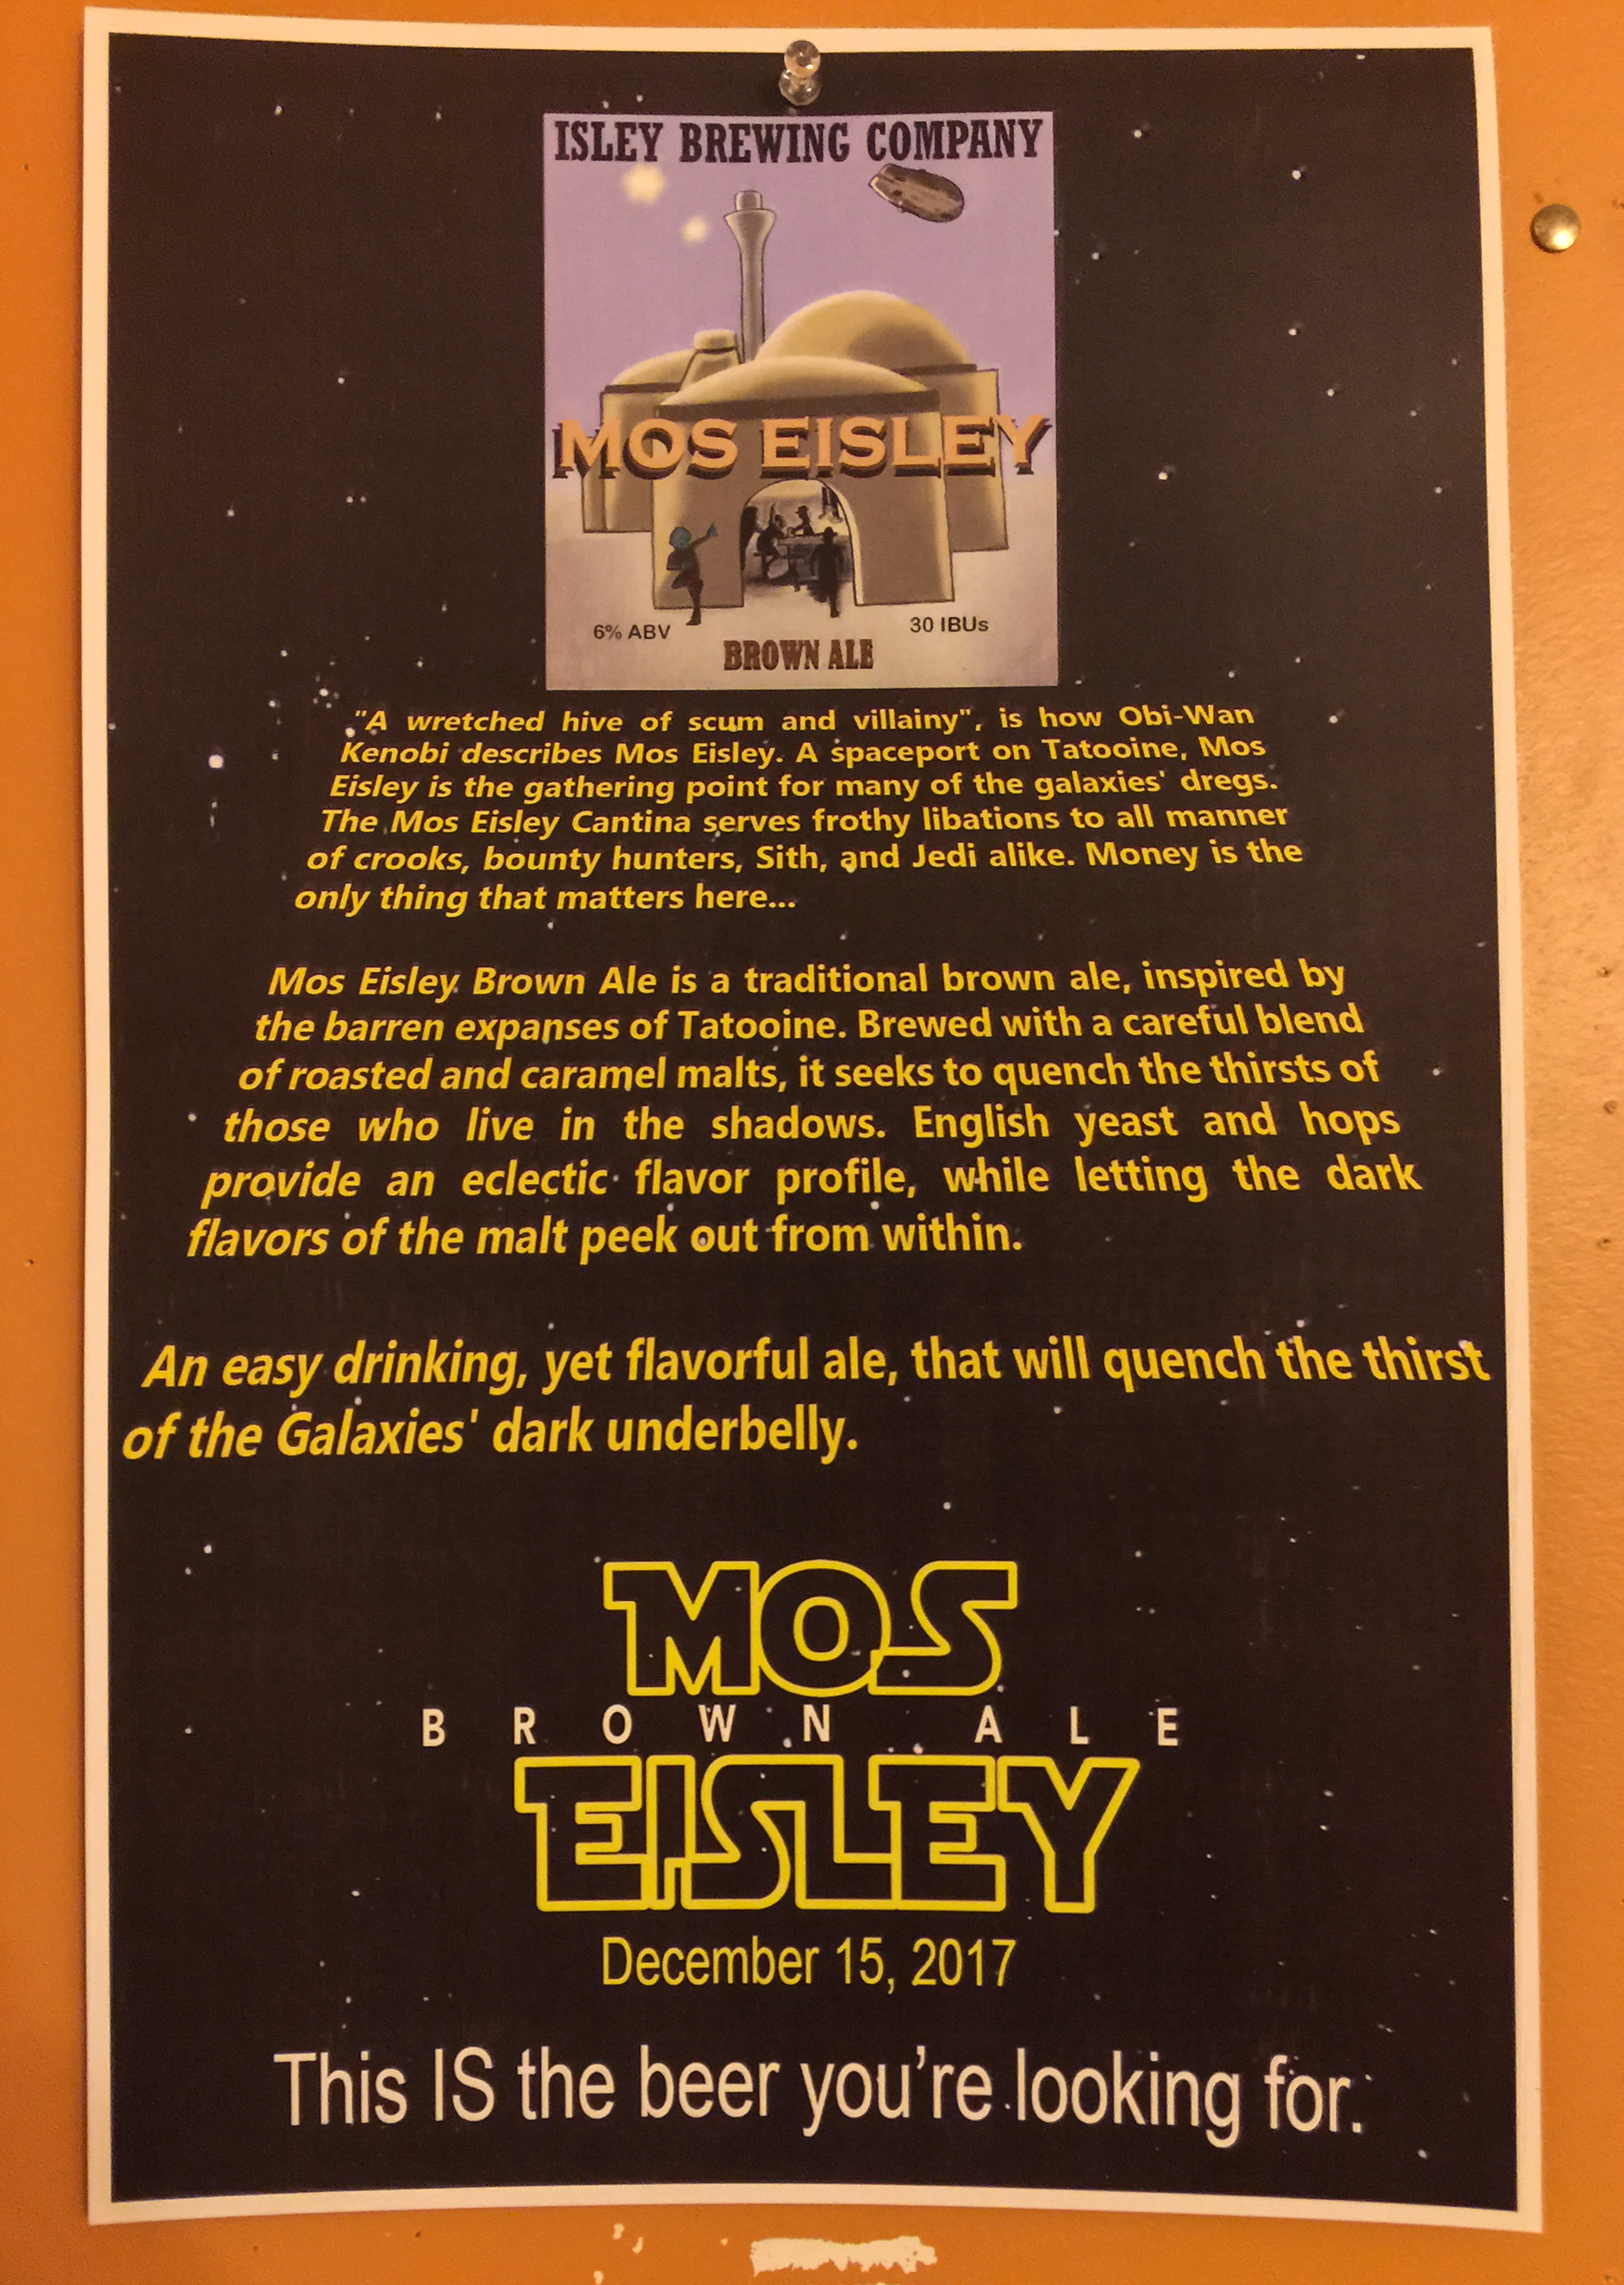 This is the beer you are looking for